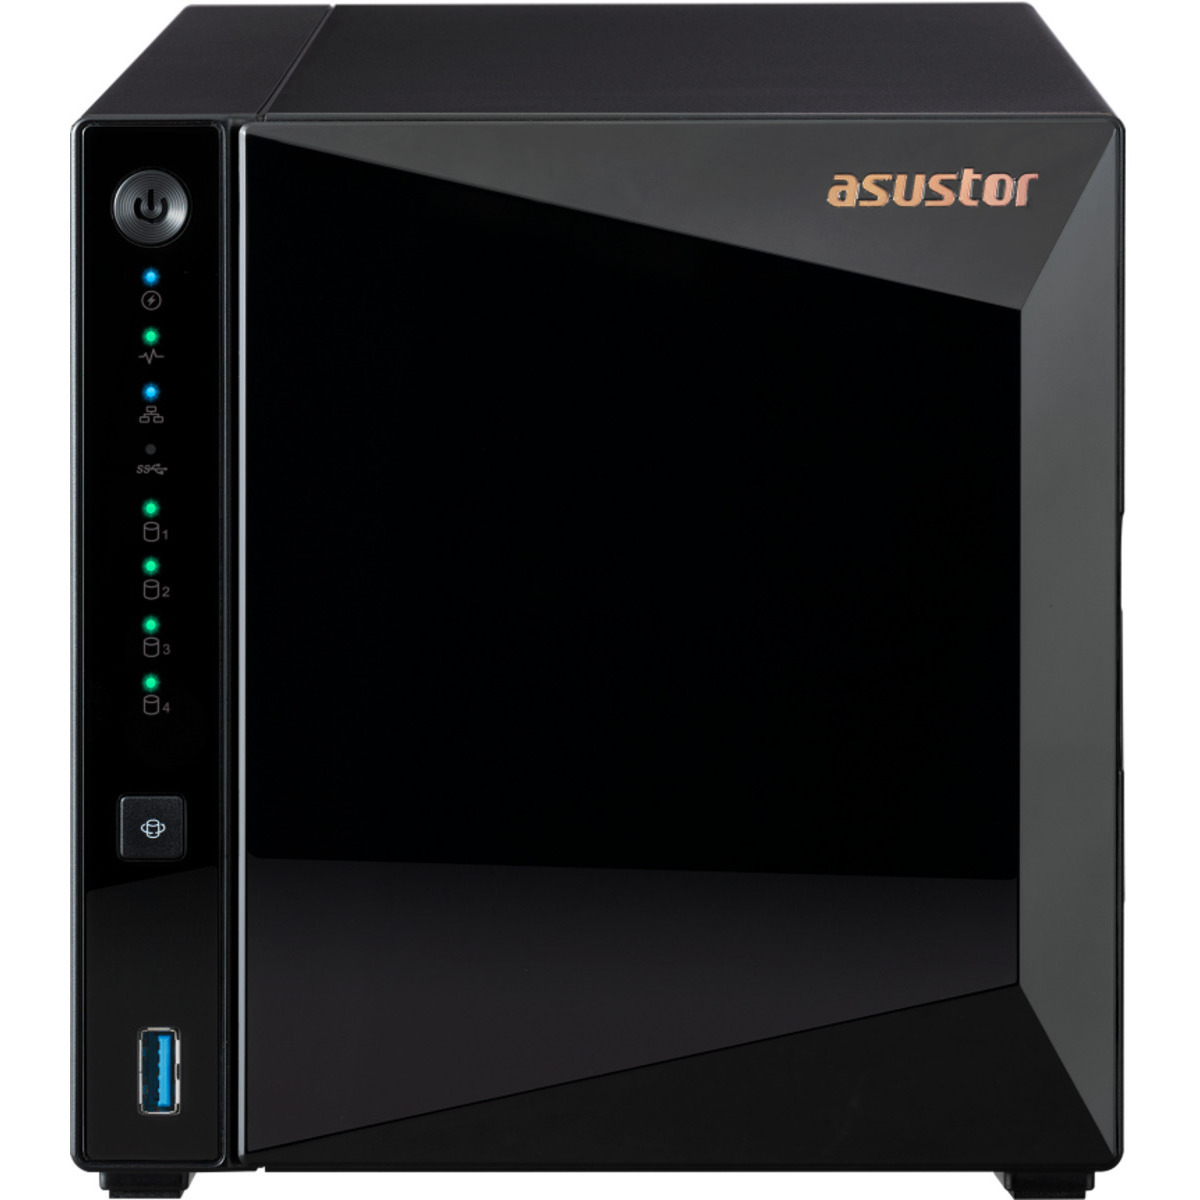 ASUSTOR DRIVESTOR 4 Pro Gen2 AS3304T v2 48tb 4-Bay Desktop Personal / Basic Home / Small Office NAS - Network Attached Storage Device 4x12tb Seagate IronWolf Pro ST12000NT001 3.5 7200rpm SATA 6Gb/s HDD NAS Class Drives Installed - Burn-In Tested - ON SALE DRIVESTOR 4 Pro Gen2 AS3304T v2